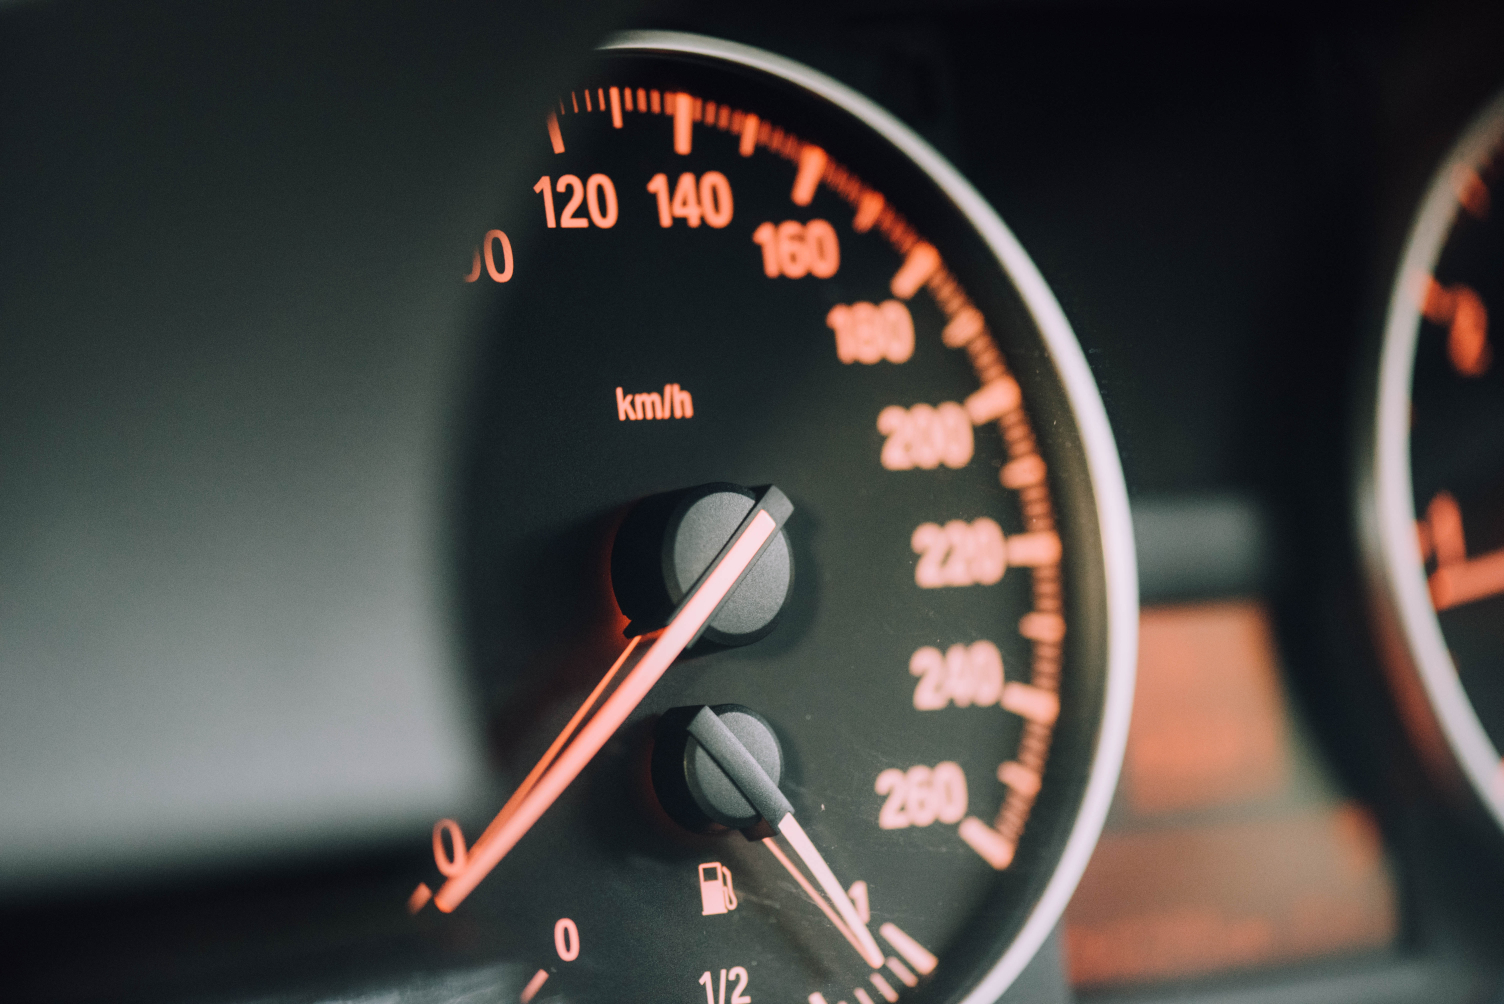 Image of a car's speedometer. There are orange numbers on a black background.